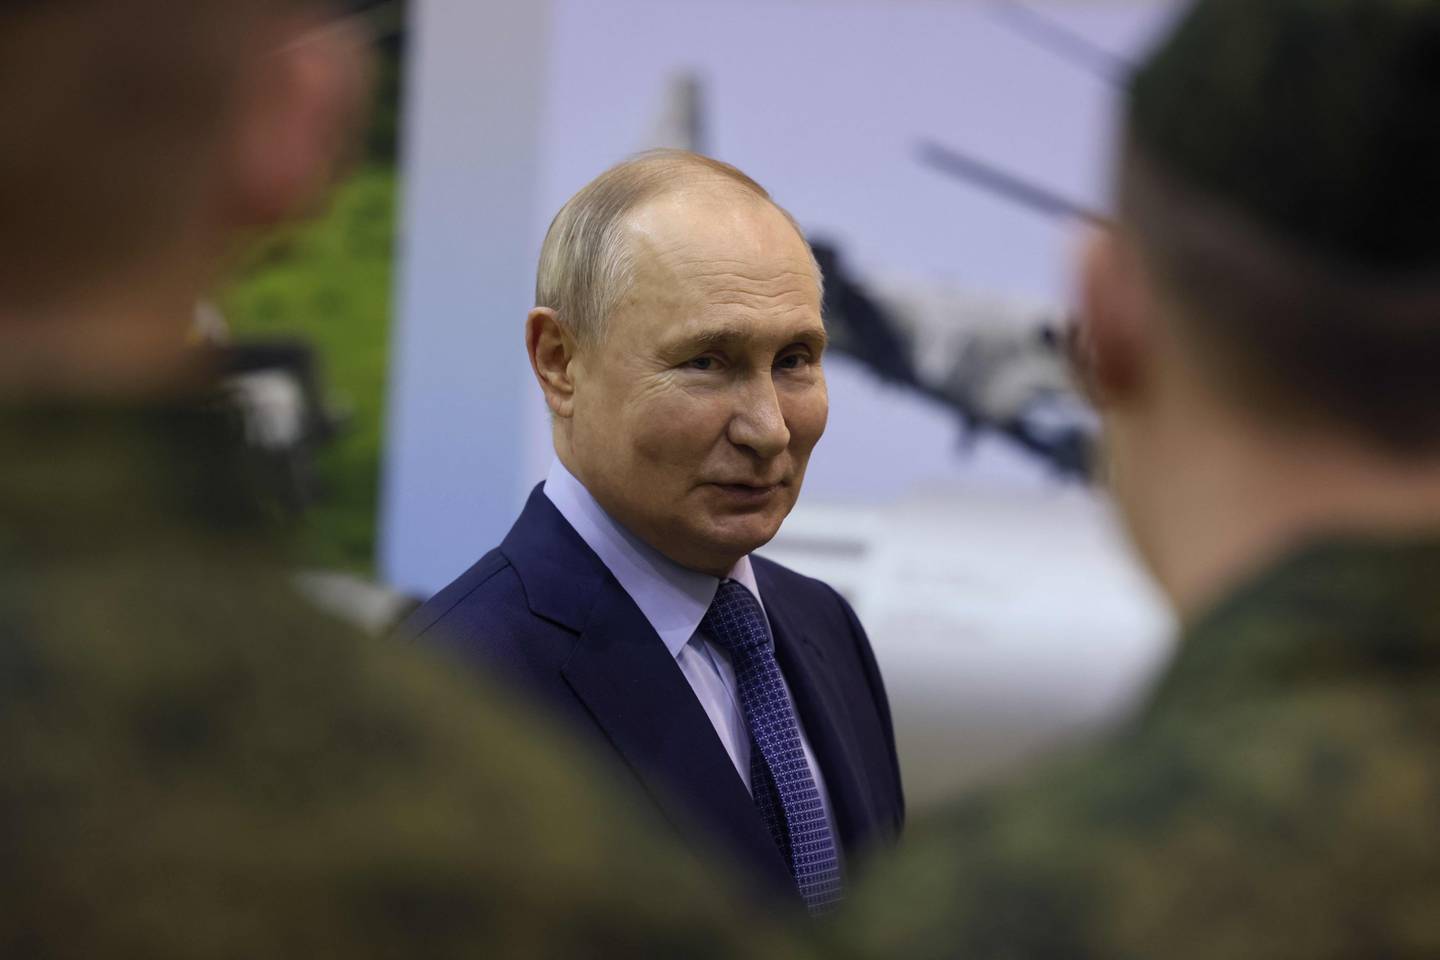 TOPSHOT - In this pool photograph distributed by the Russian state agency Sputnik, Russia's President Vladimir Putin visits the 344th Army Aviation Centre of aircrews combat training and transition in Torzhok in the Tver region on March 27, 2024. (Photo by Mikhail METZEL / POOL / AFP)